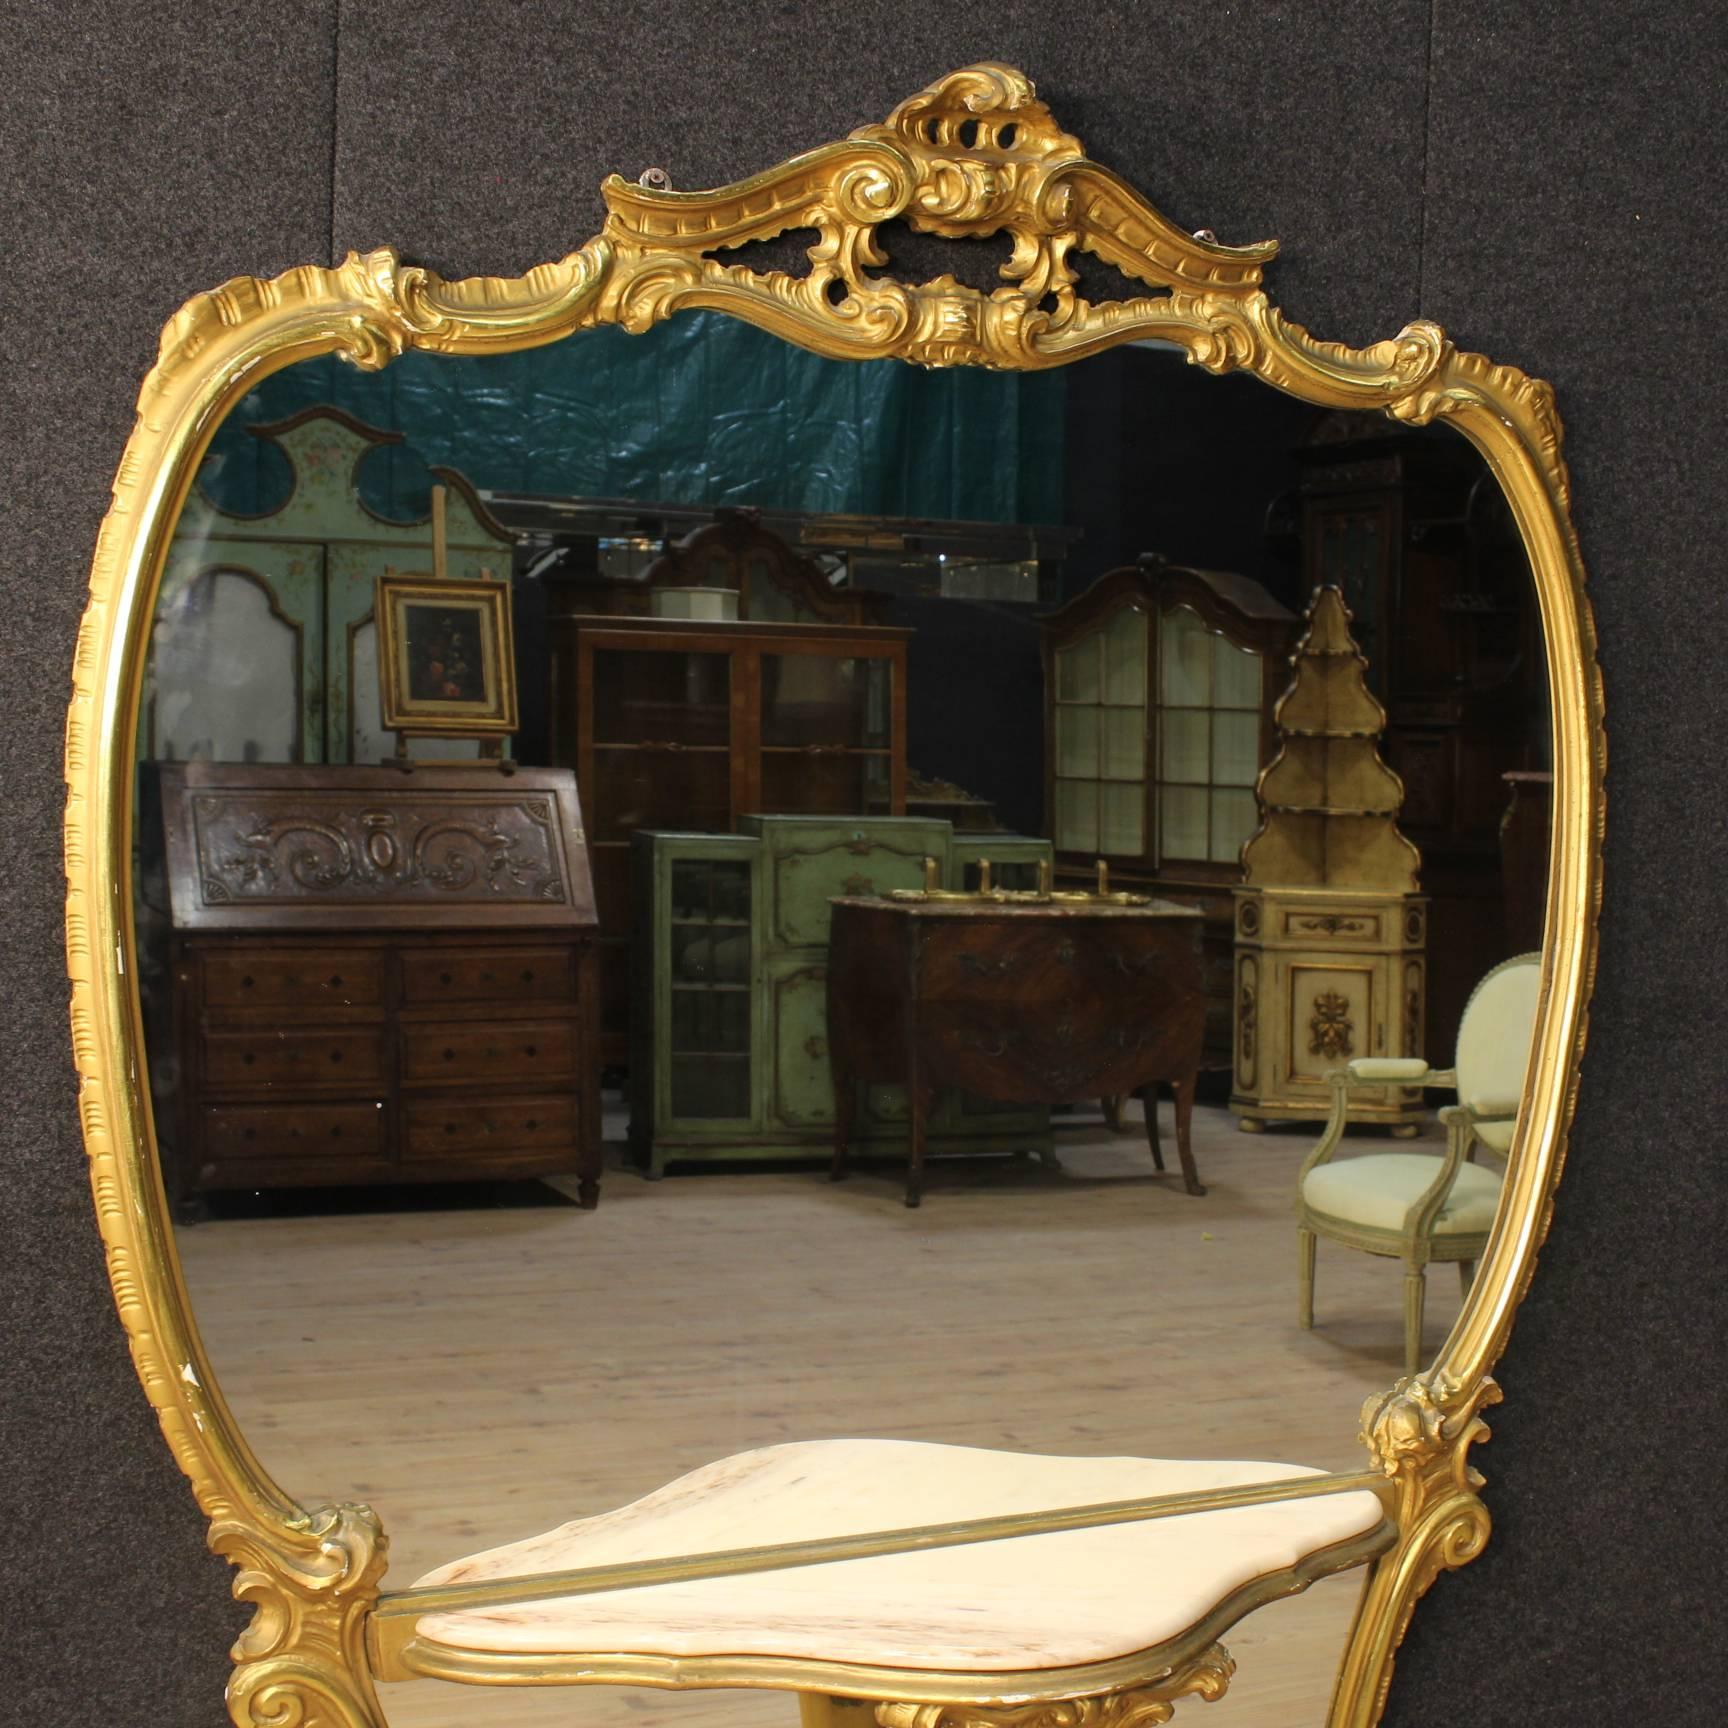 Great 20th century Italian cheval mirror. Furniture made by ornately carved and gilded wood of great impact and beautiful decoration. Cheval mirror resting on three feet equipped with a console table with top in onyx and recessed mirrors. Furniture